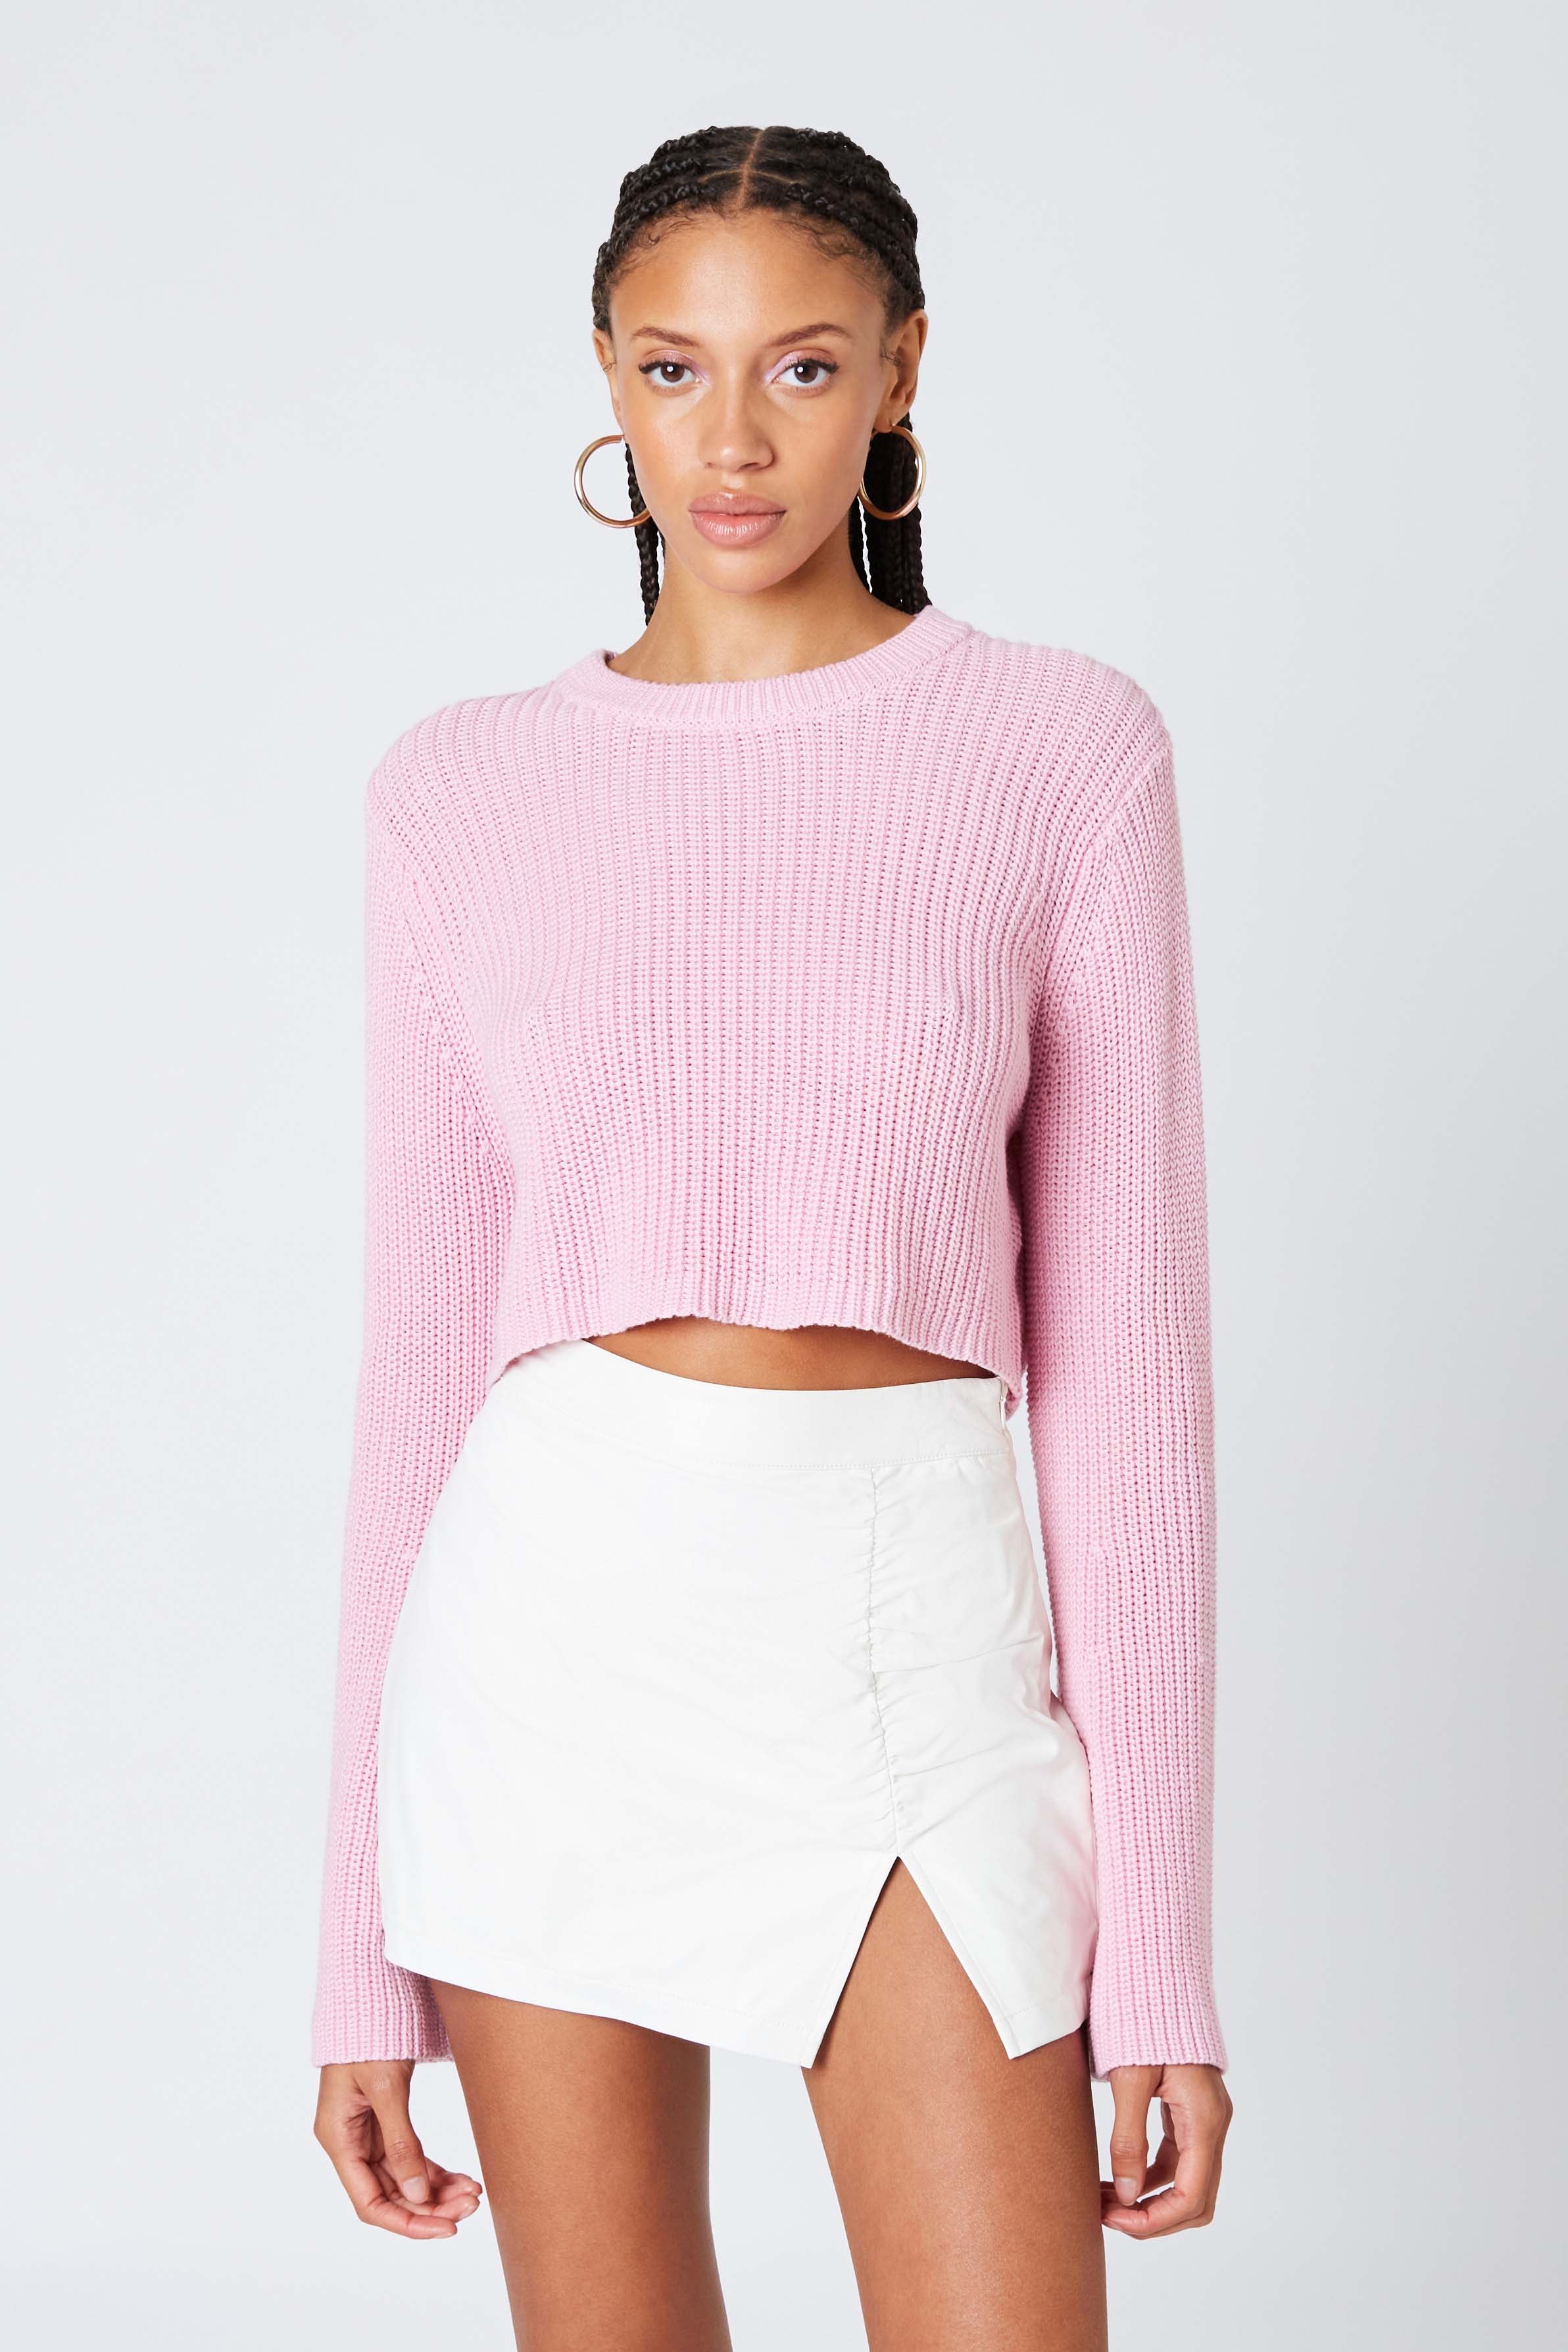 Cropped Crewneck Sweater in Petal Pink Front View